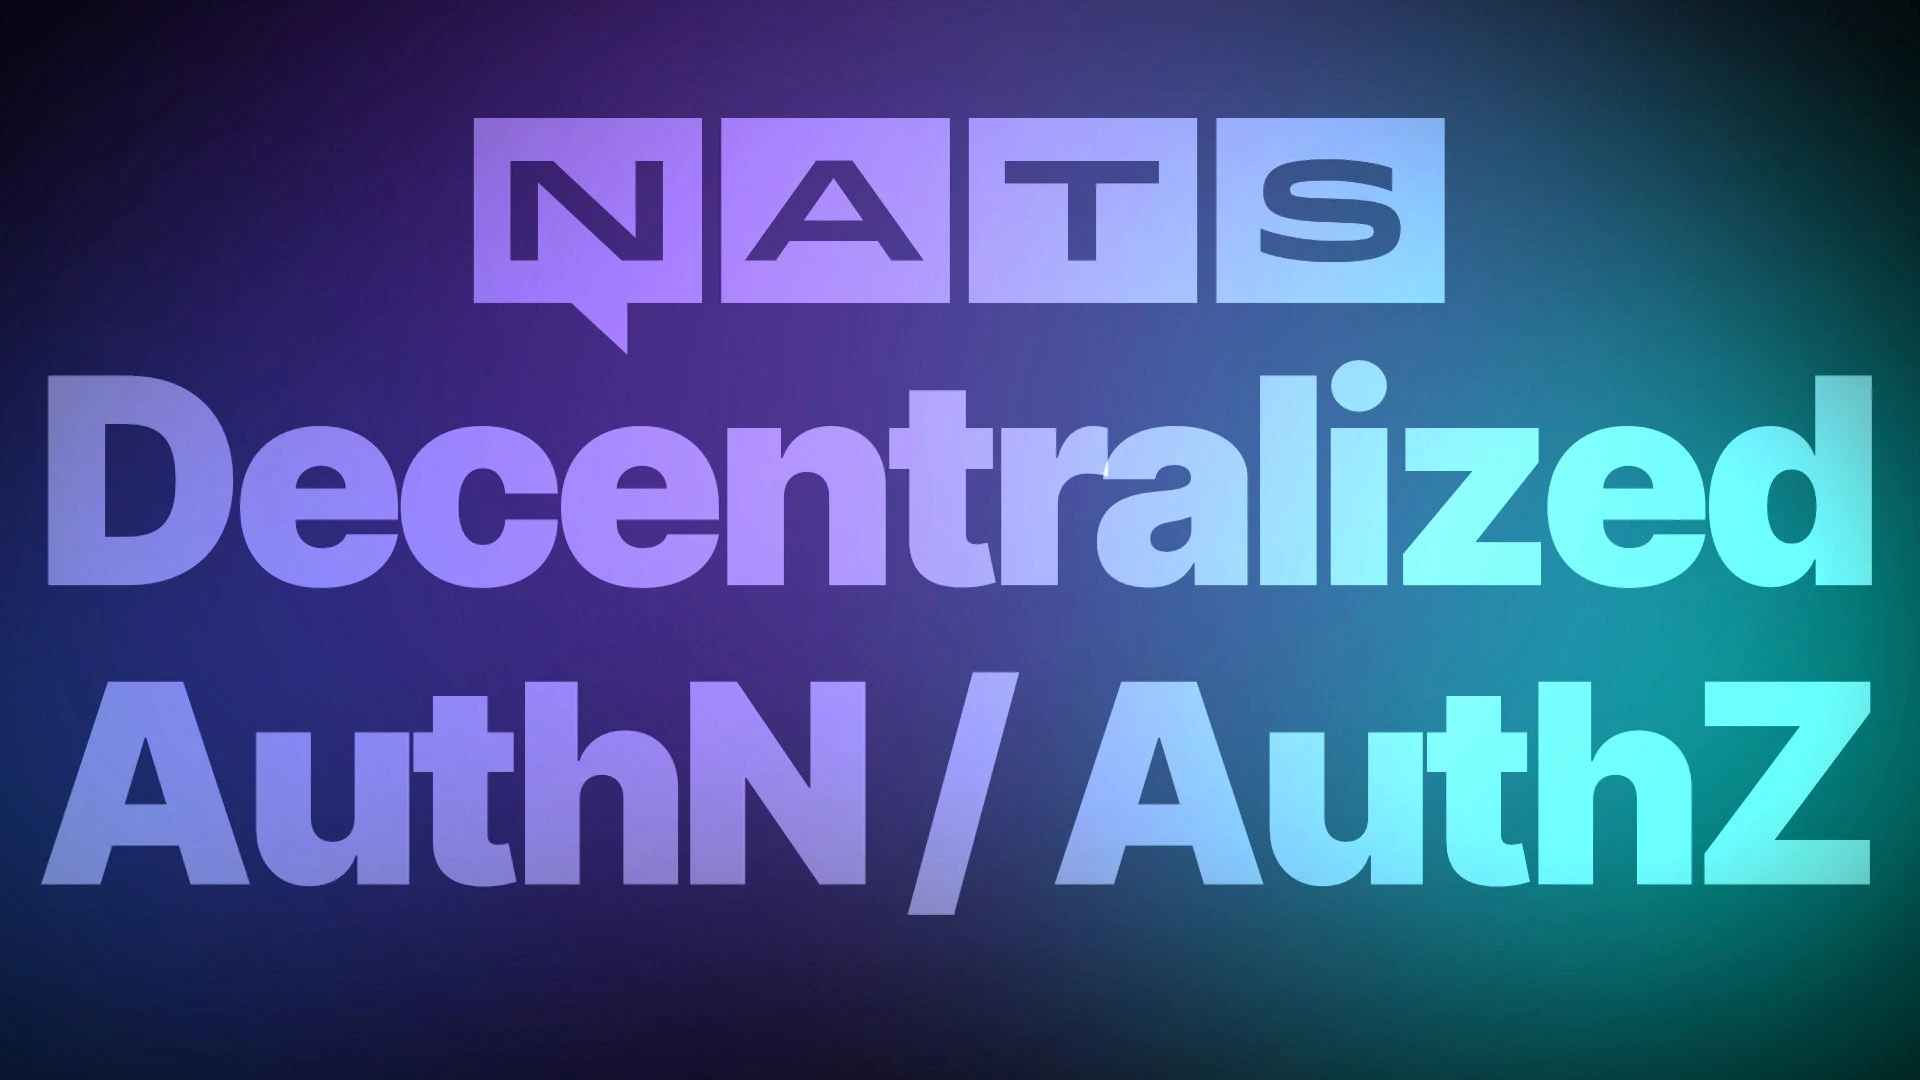 How to set up Decentralized Authentication/Authorization in NATS